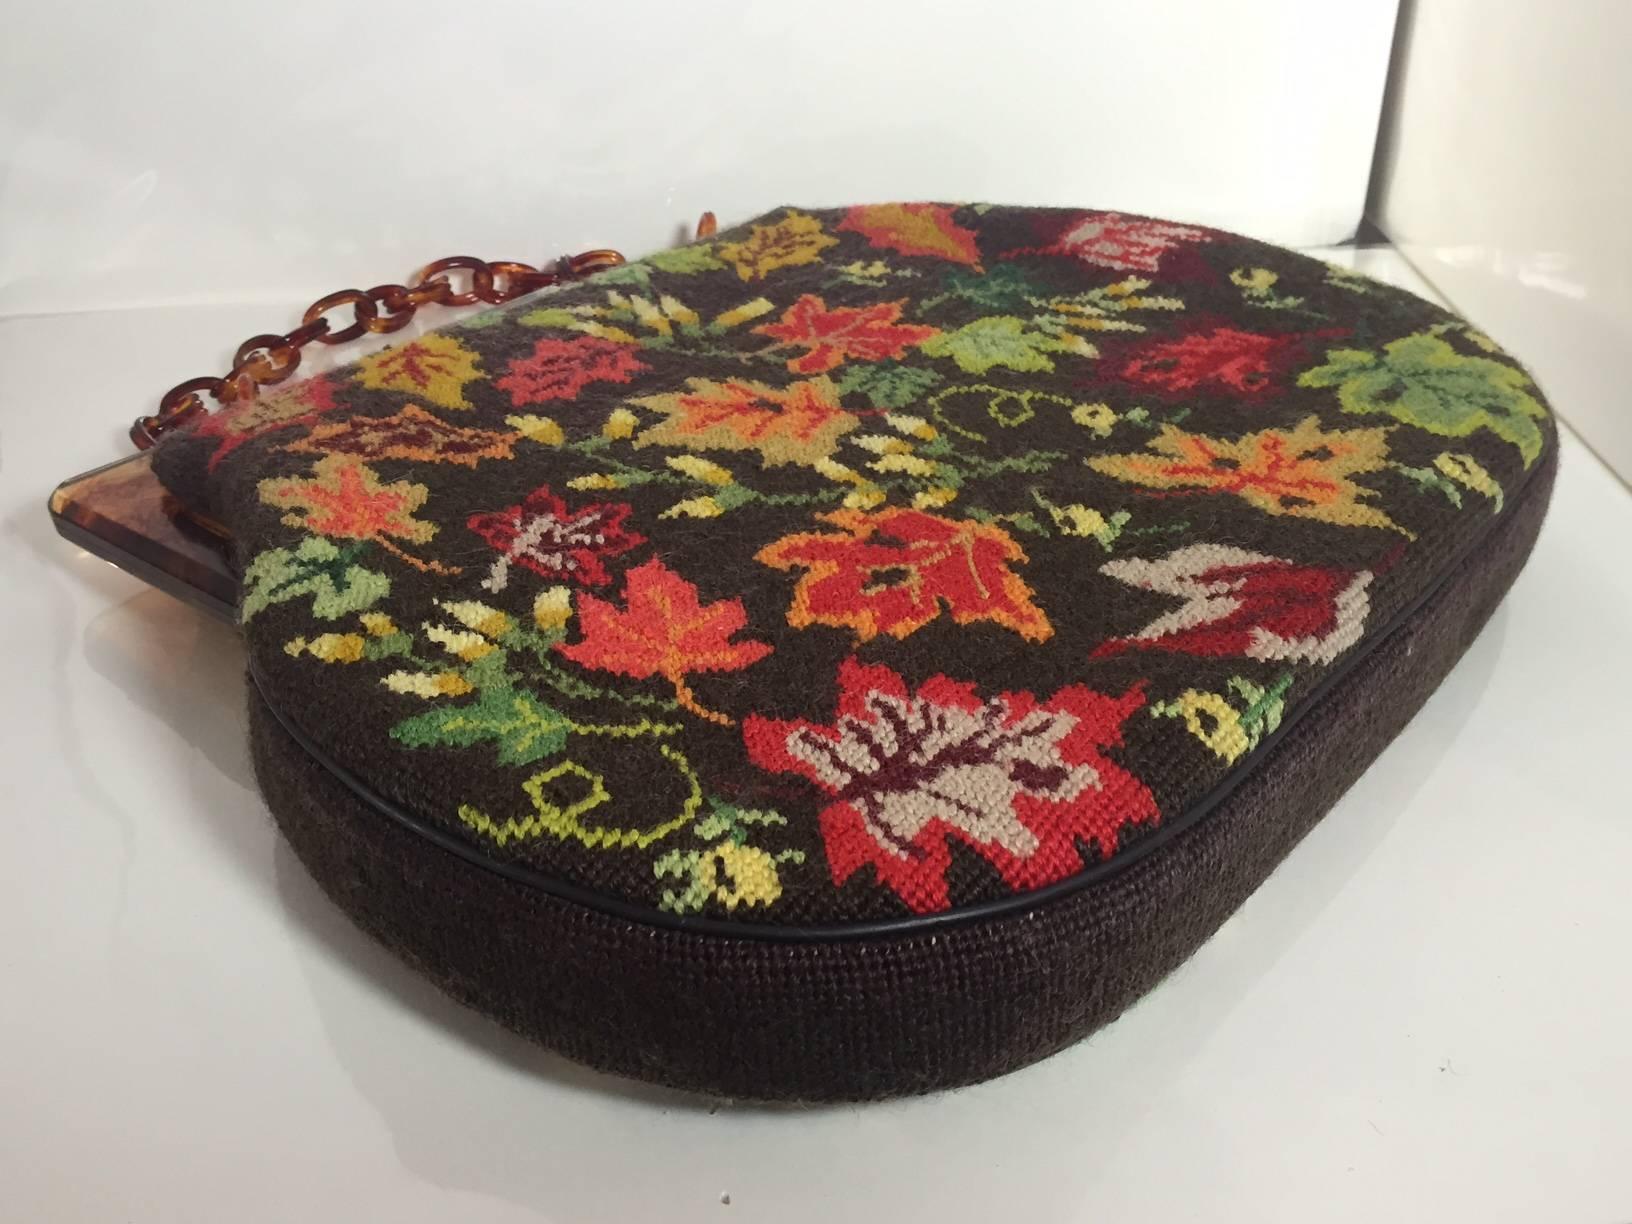 Women's 1950s Autumn Leaves Needle Point Handbag with Celluloid Frame and Chain